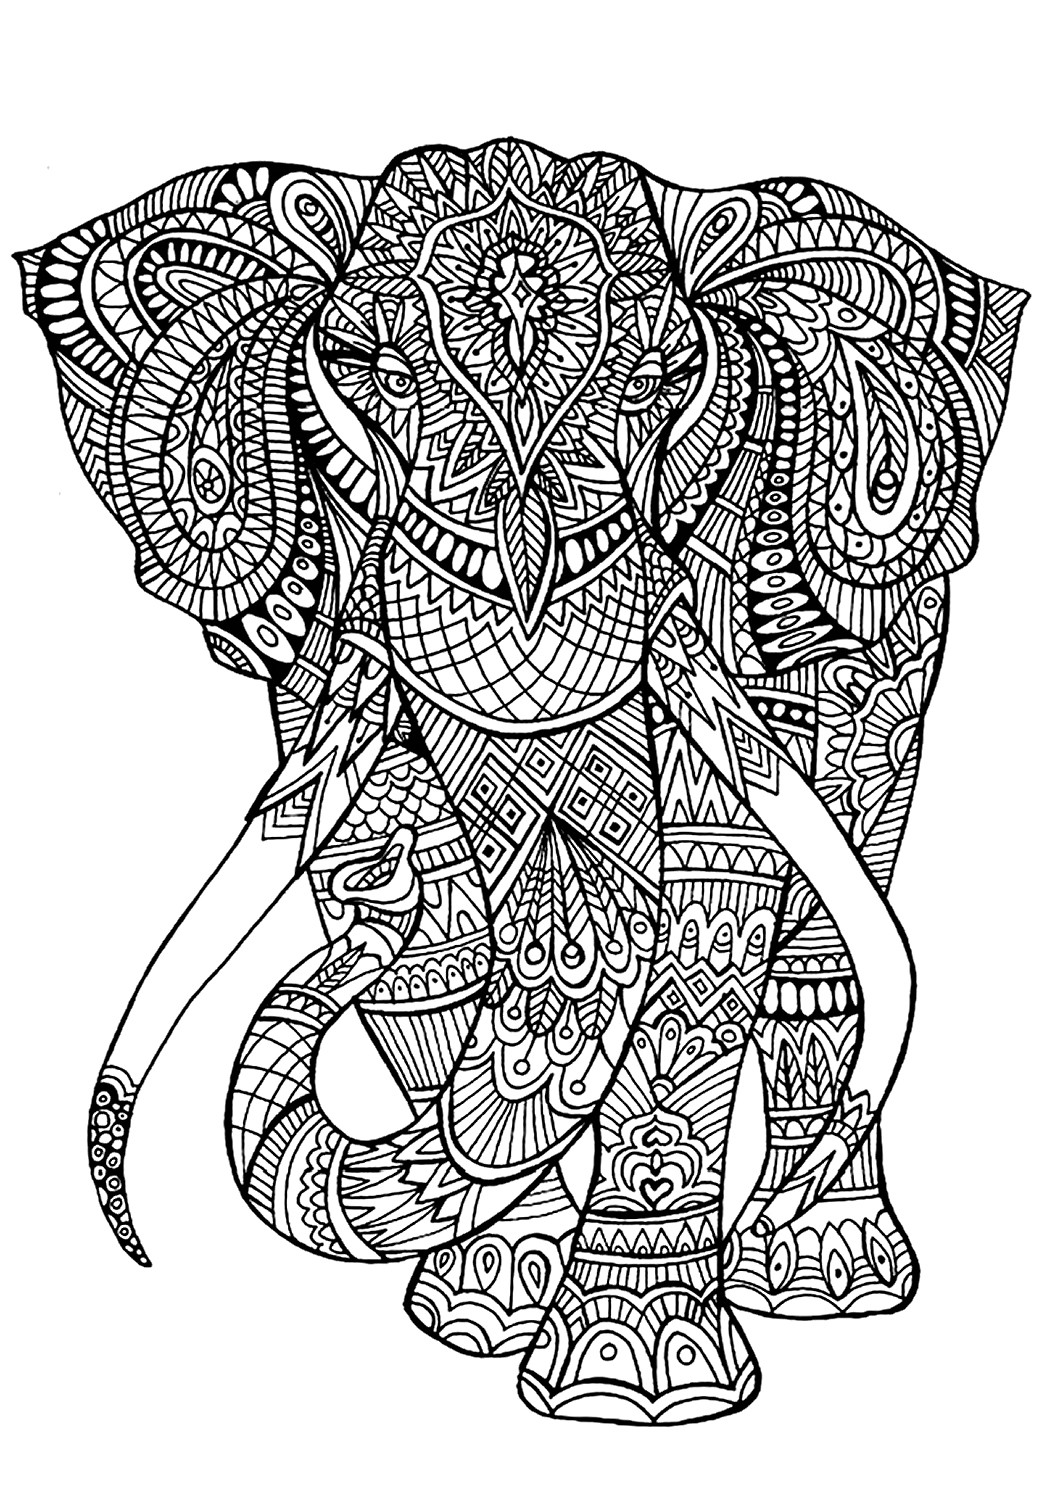 Adult Coloring Book Elephant
 like this one intended for adults to color can